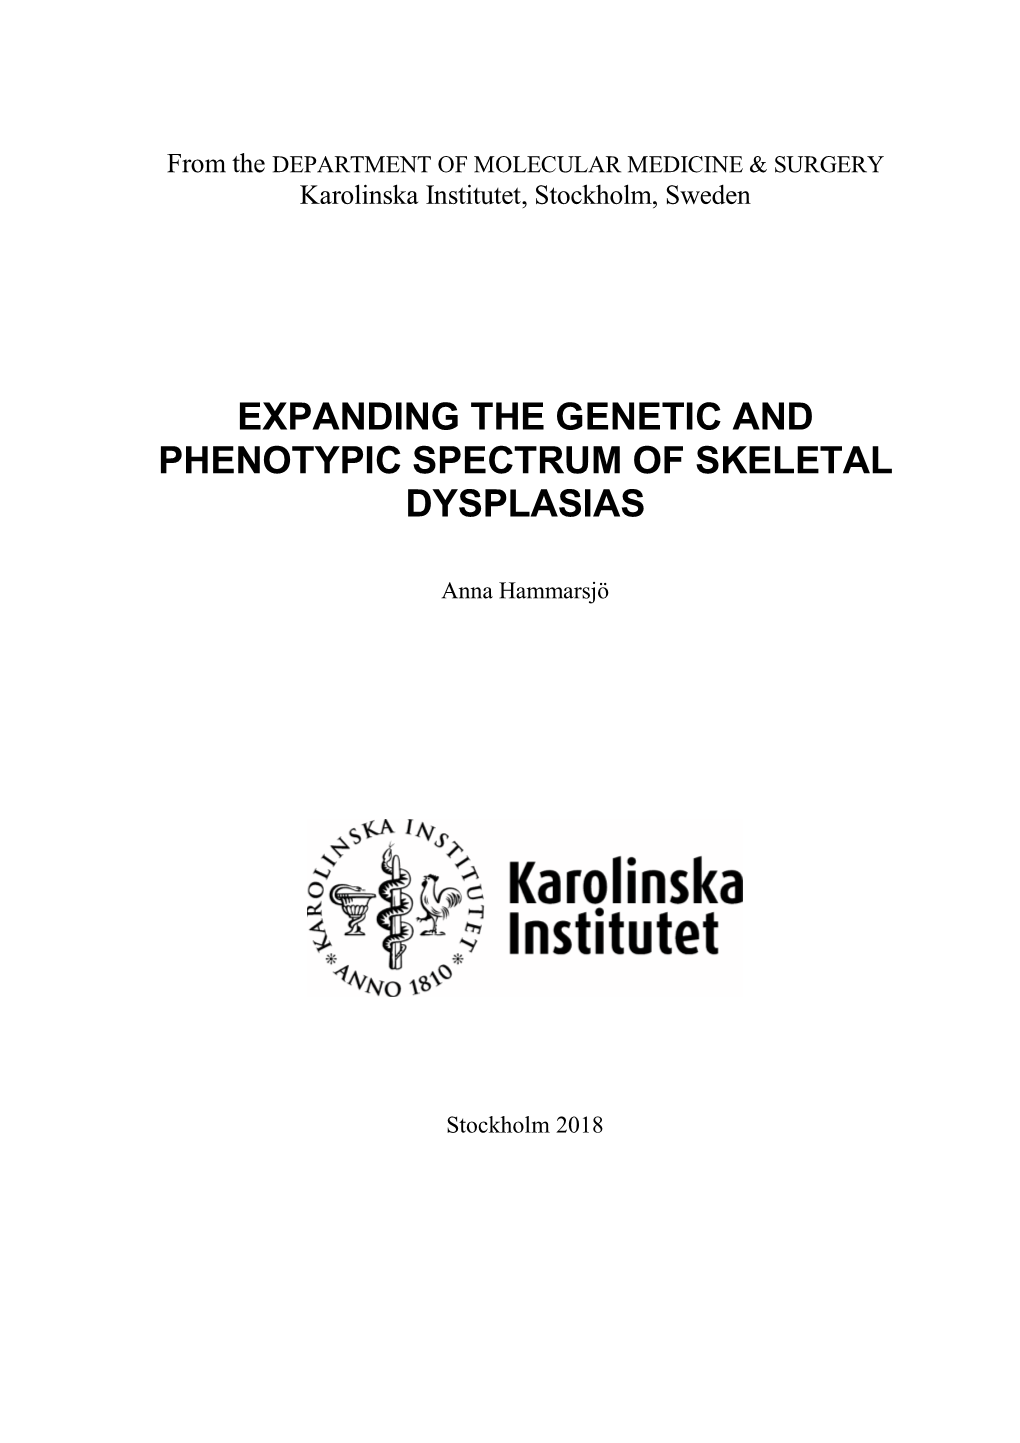 Expanding the Genetic and Phenotypic Spectrum of Skeletal Dysplasias